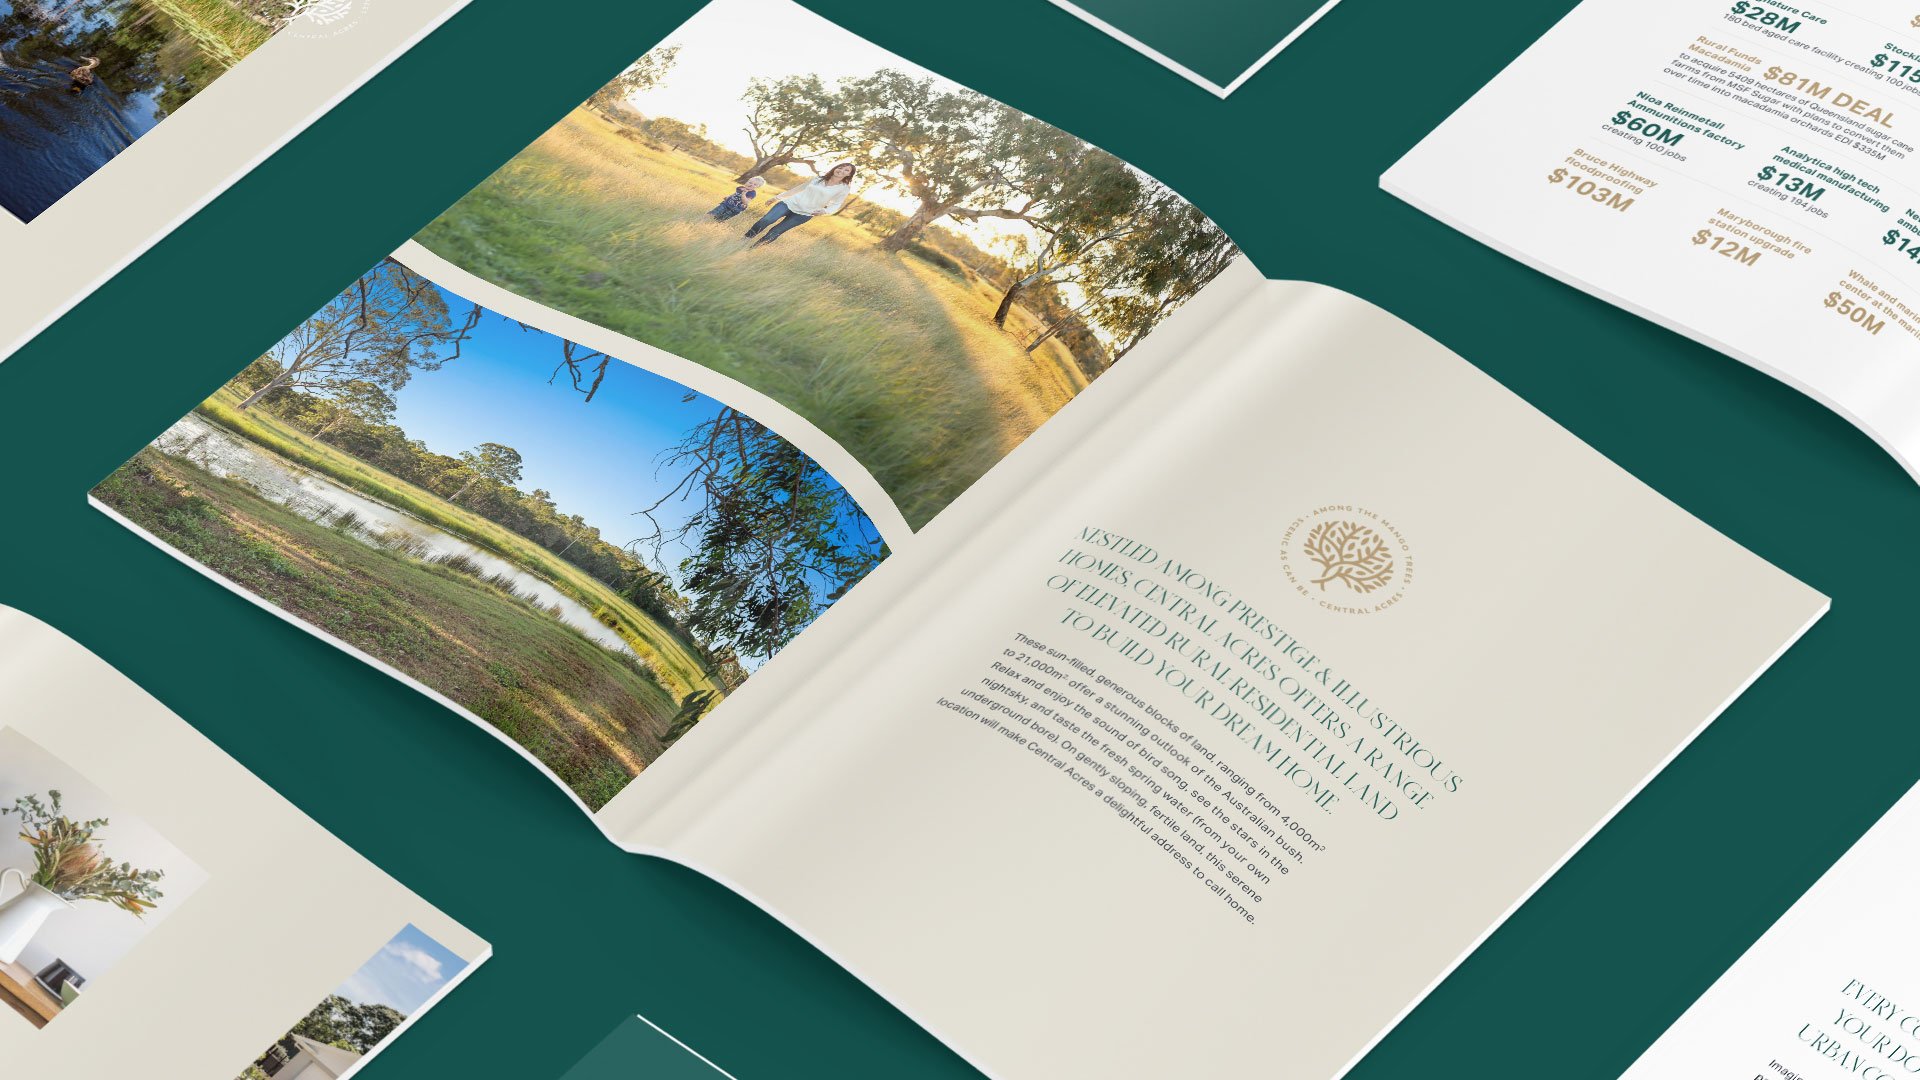 An open brochure page from Central Acres Land development, highlighting tthe lifestyle with messaging and aerial views of a coastal community